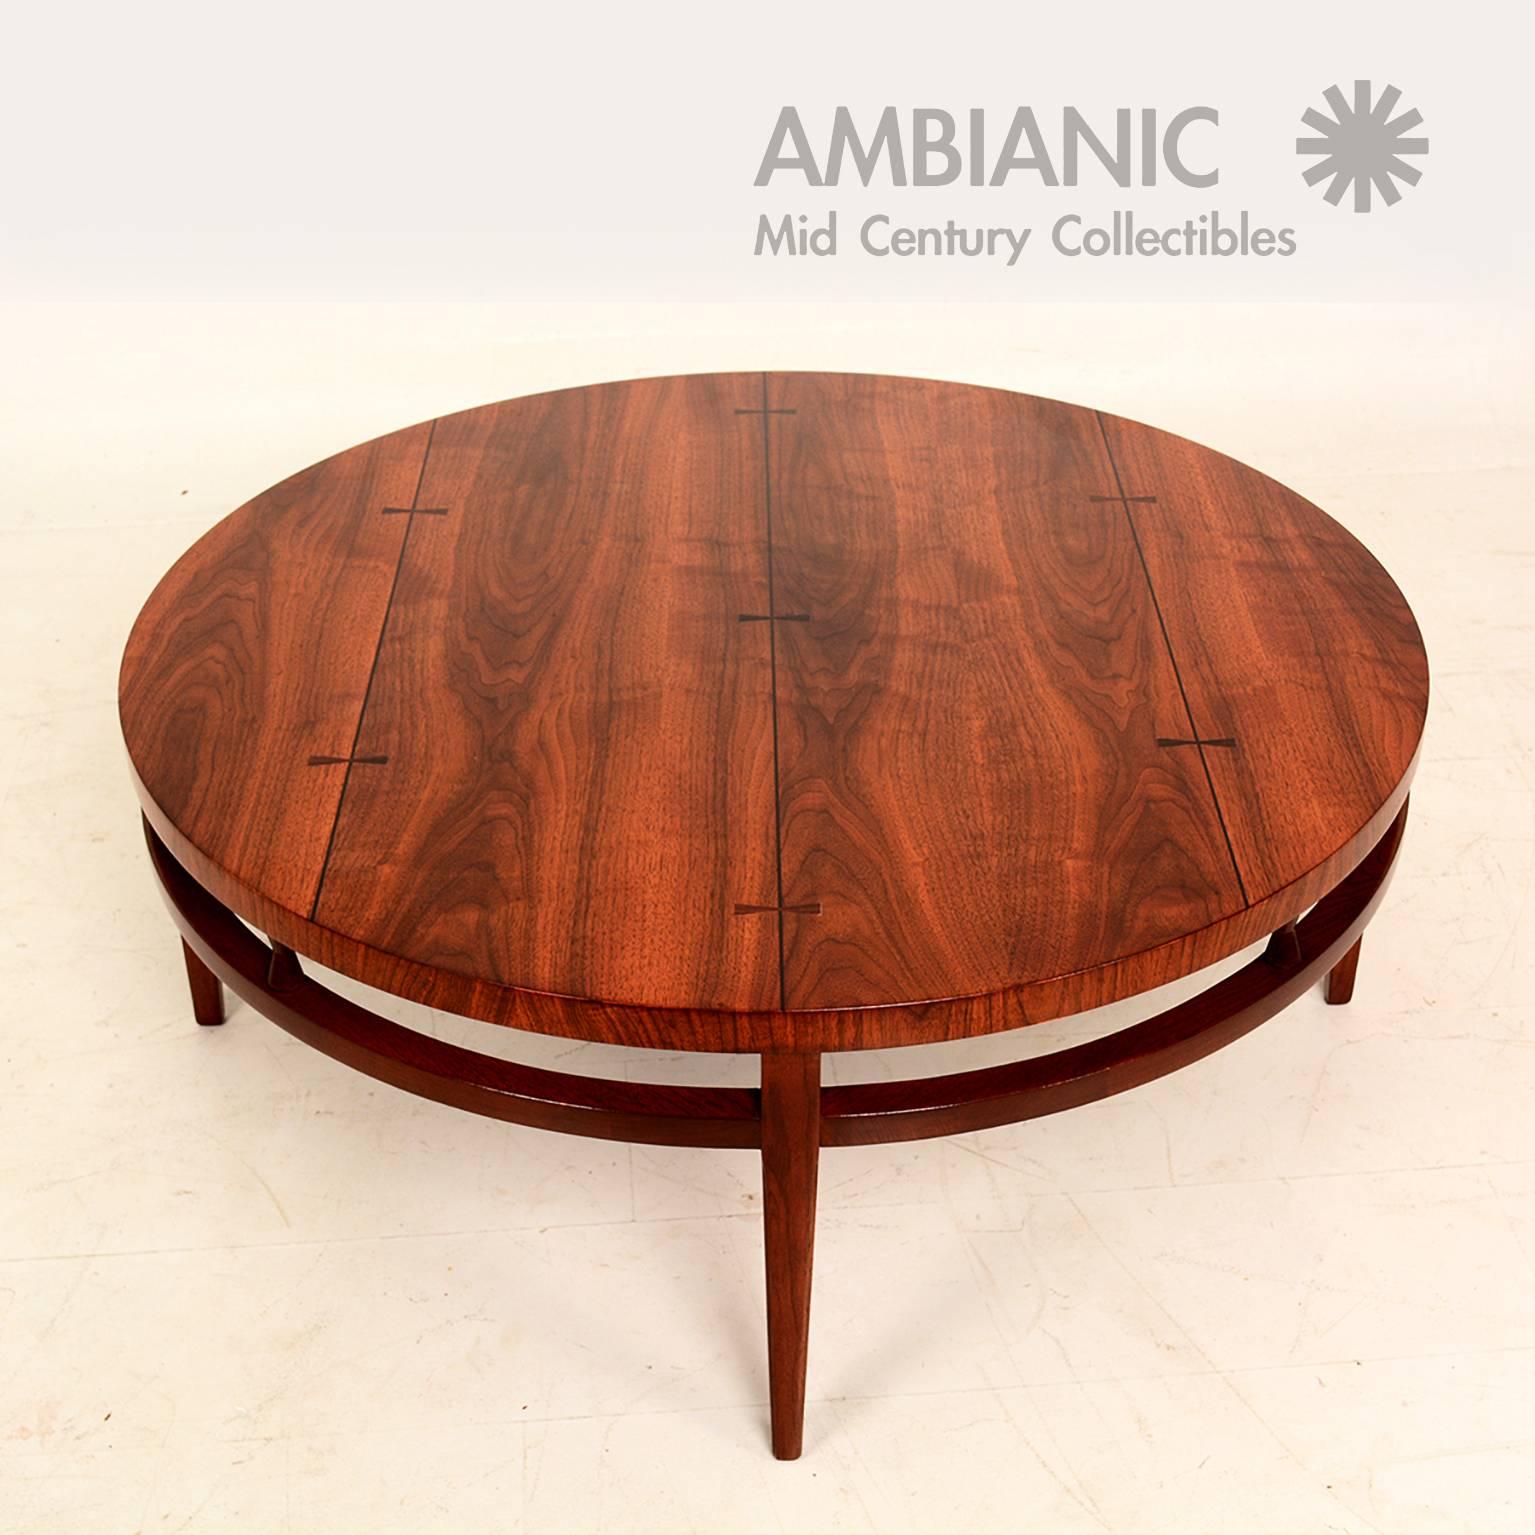 American Mid-Century Modern Round Coffee Cocktail Table by Lane after Paul McCobb